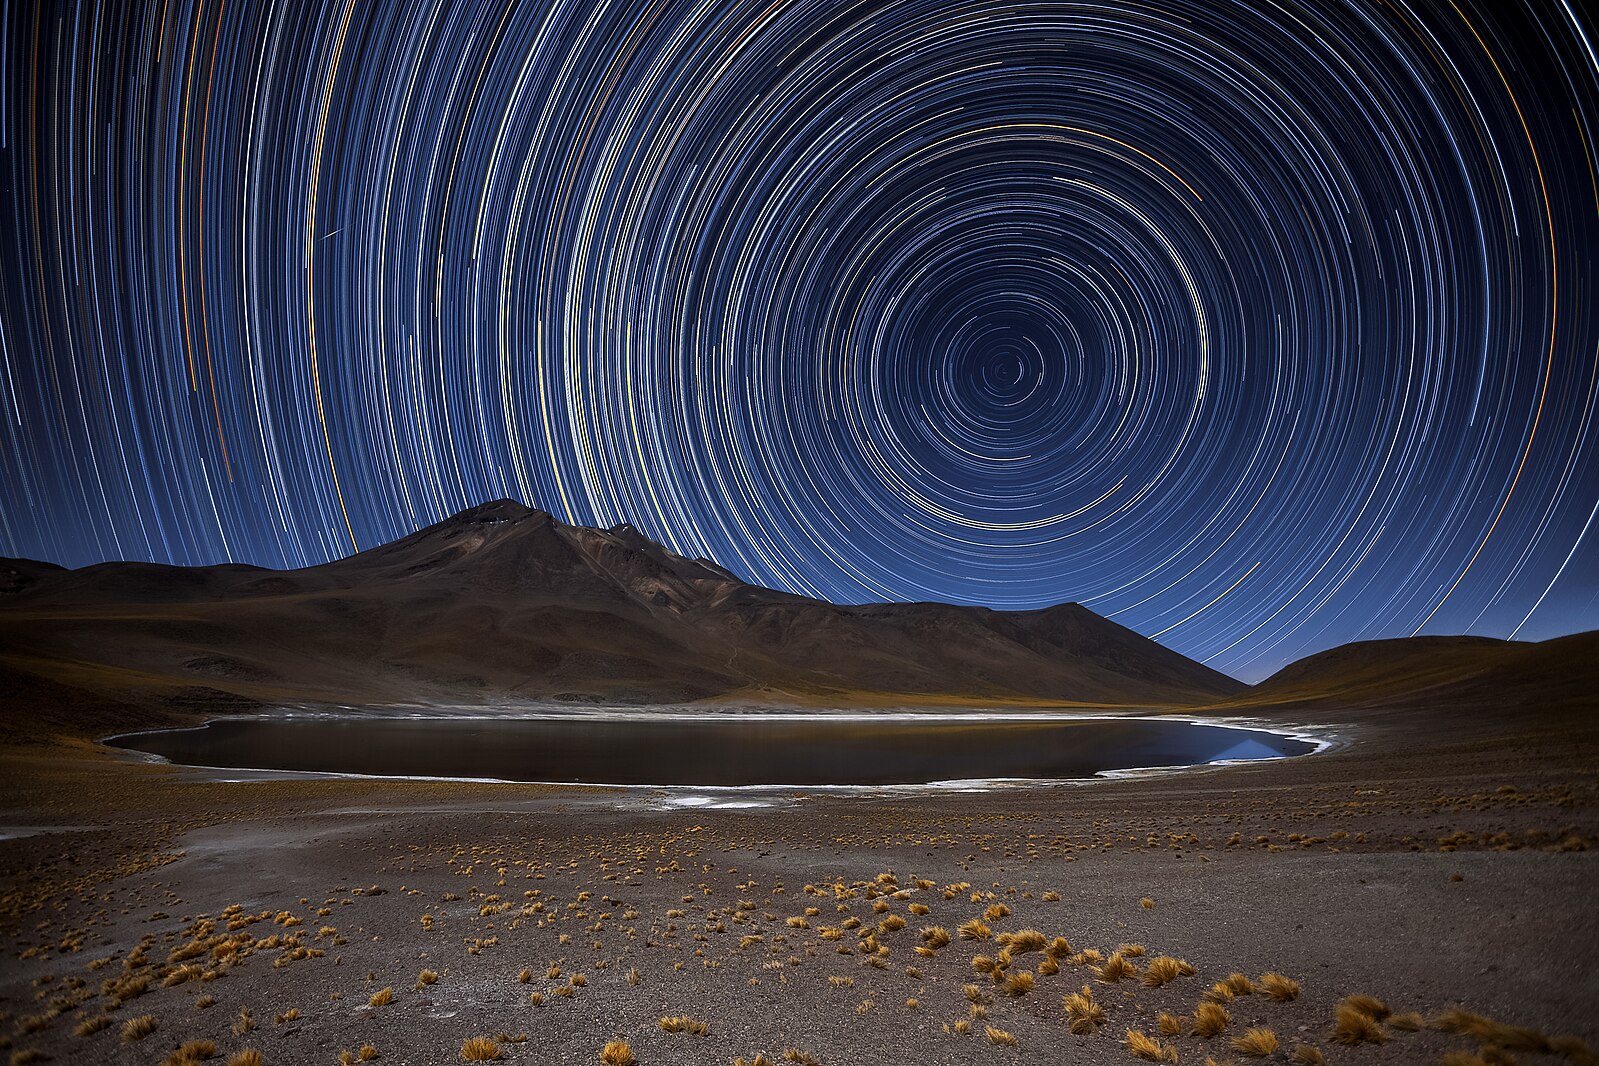 1599px-All_In_A_Spin_Star_trail.jpg